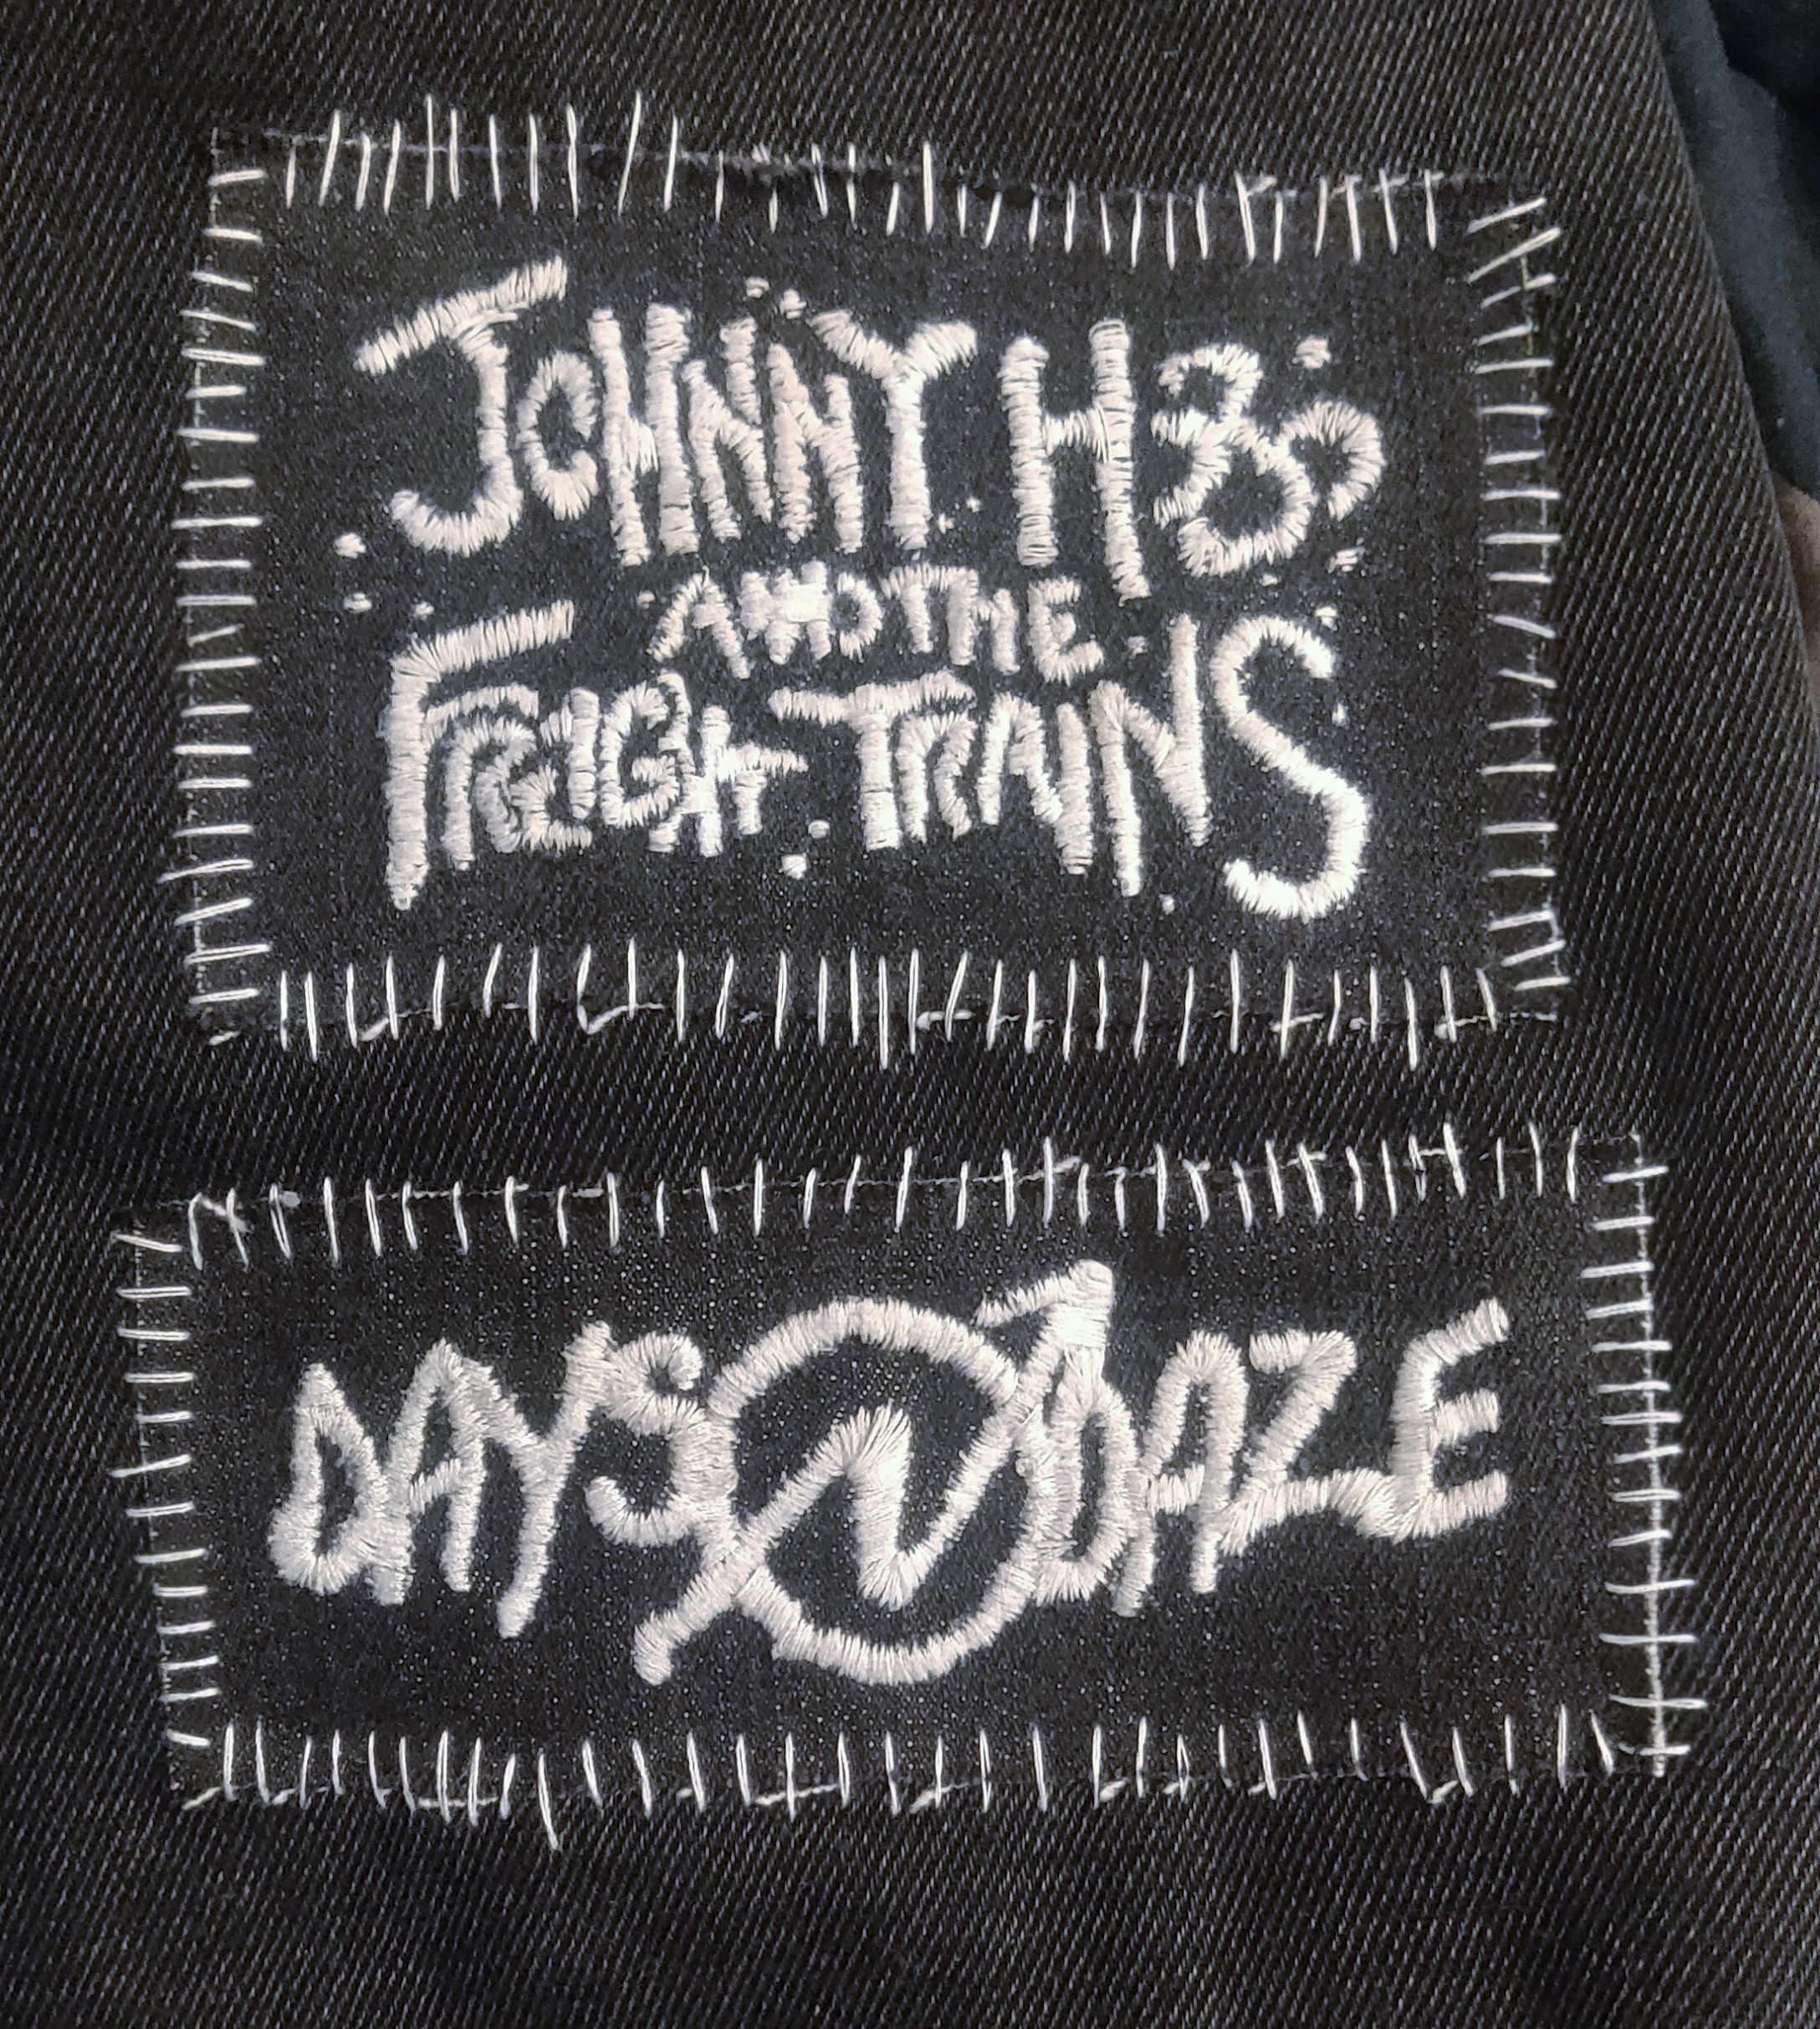 Two patches that show the band logos of Johnny Hobo and the Freight Trains and Days n' Daze.